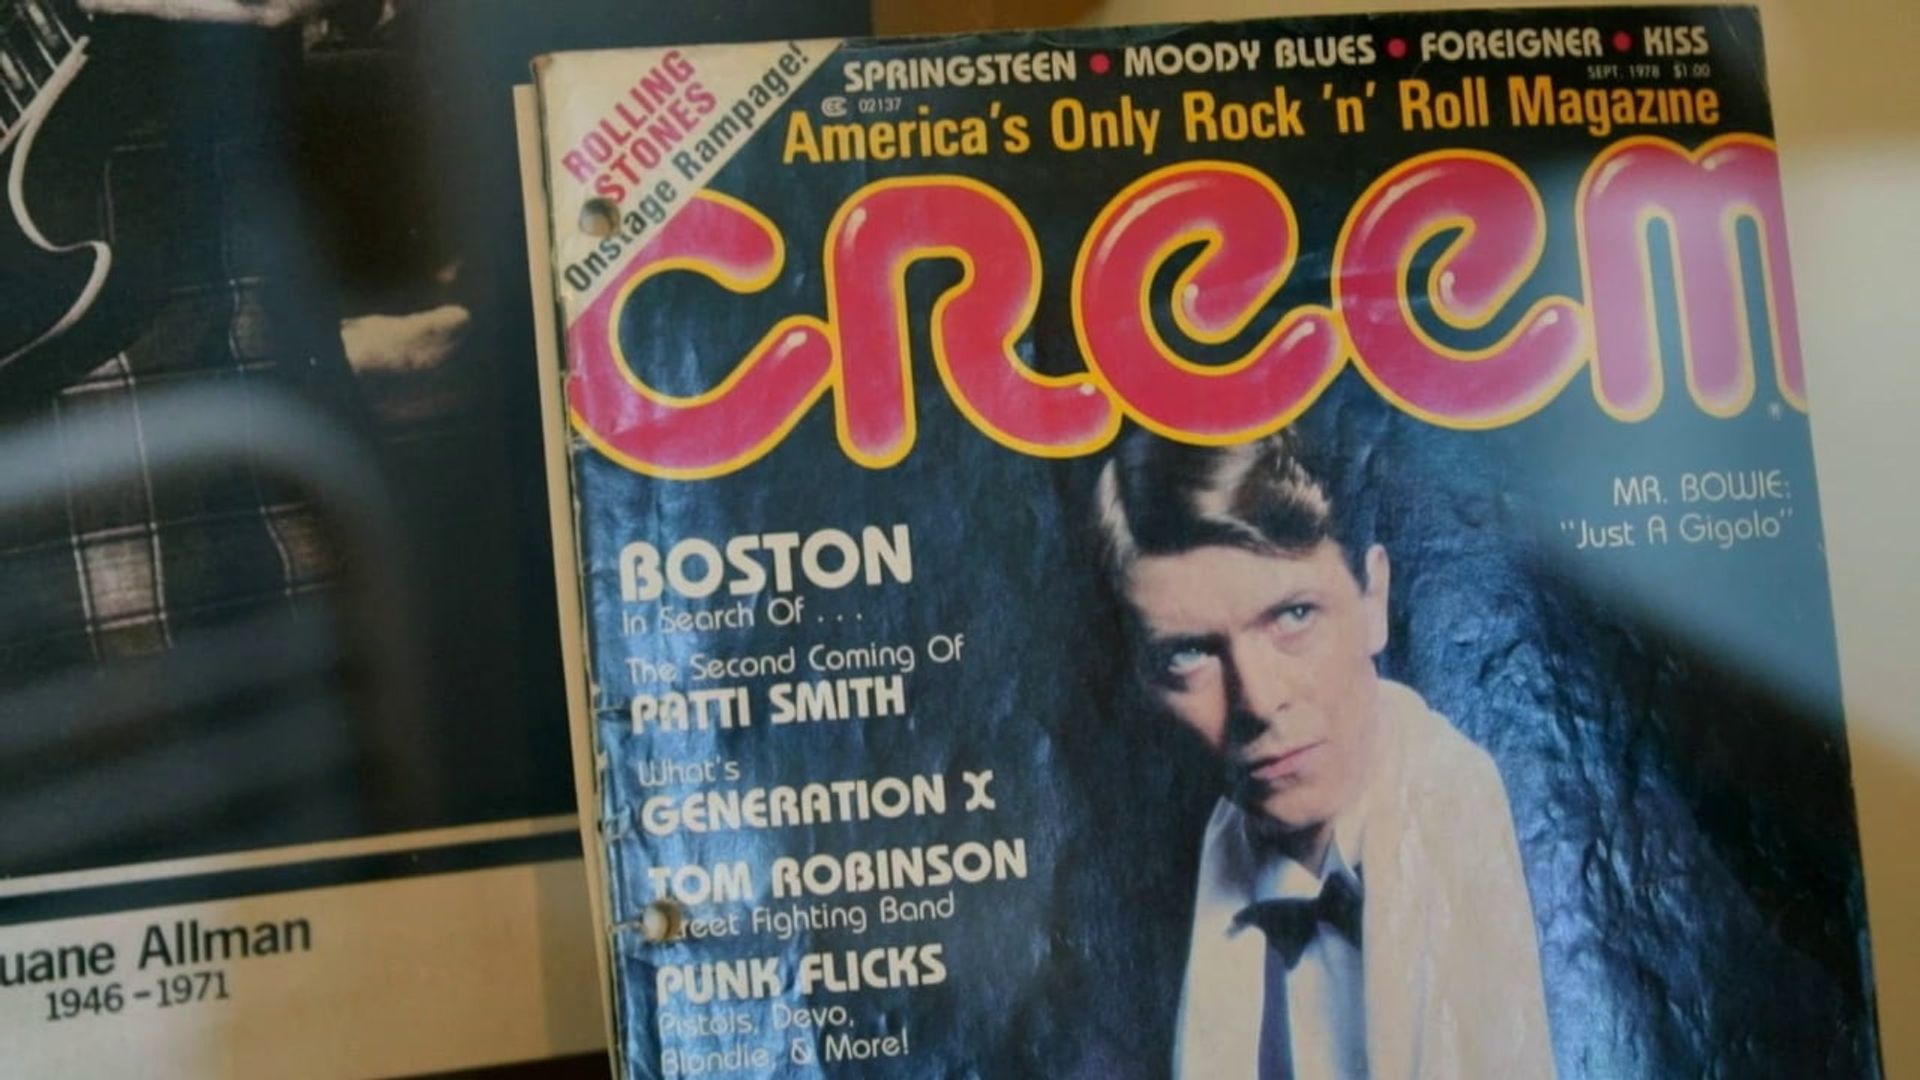 Creem: America's Only Rock 'n' Roll Magazine background